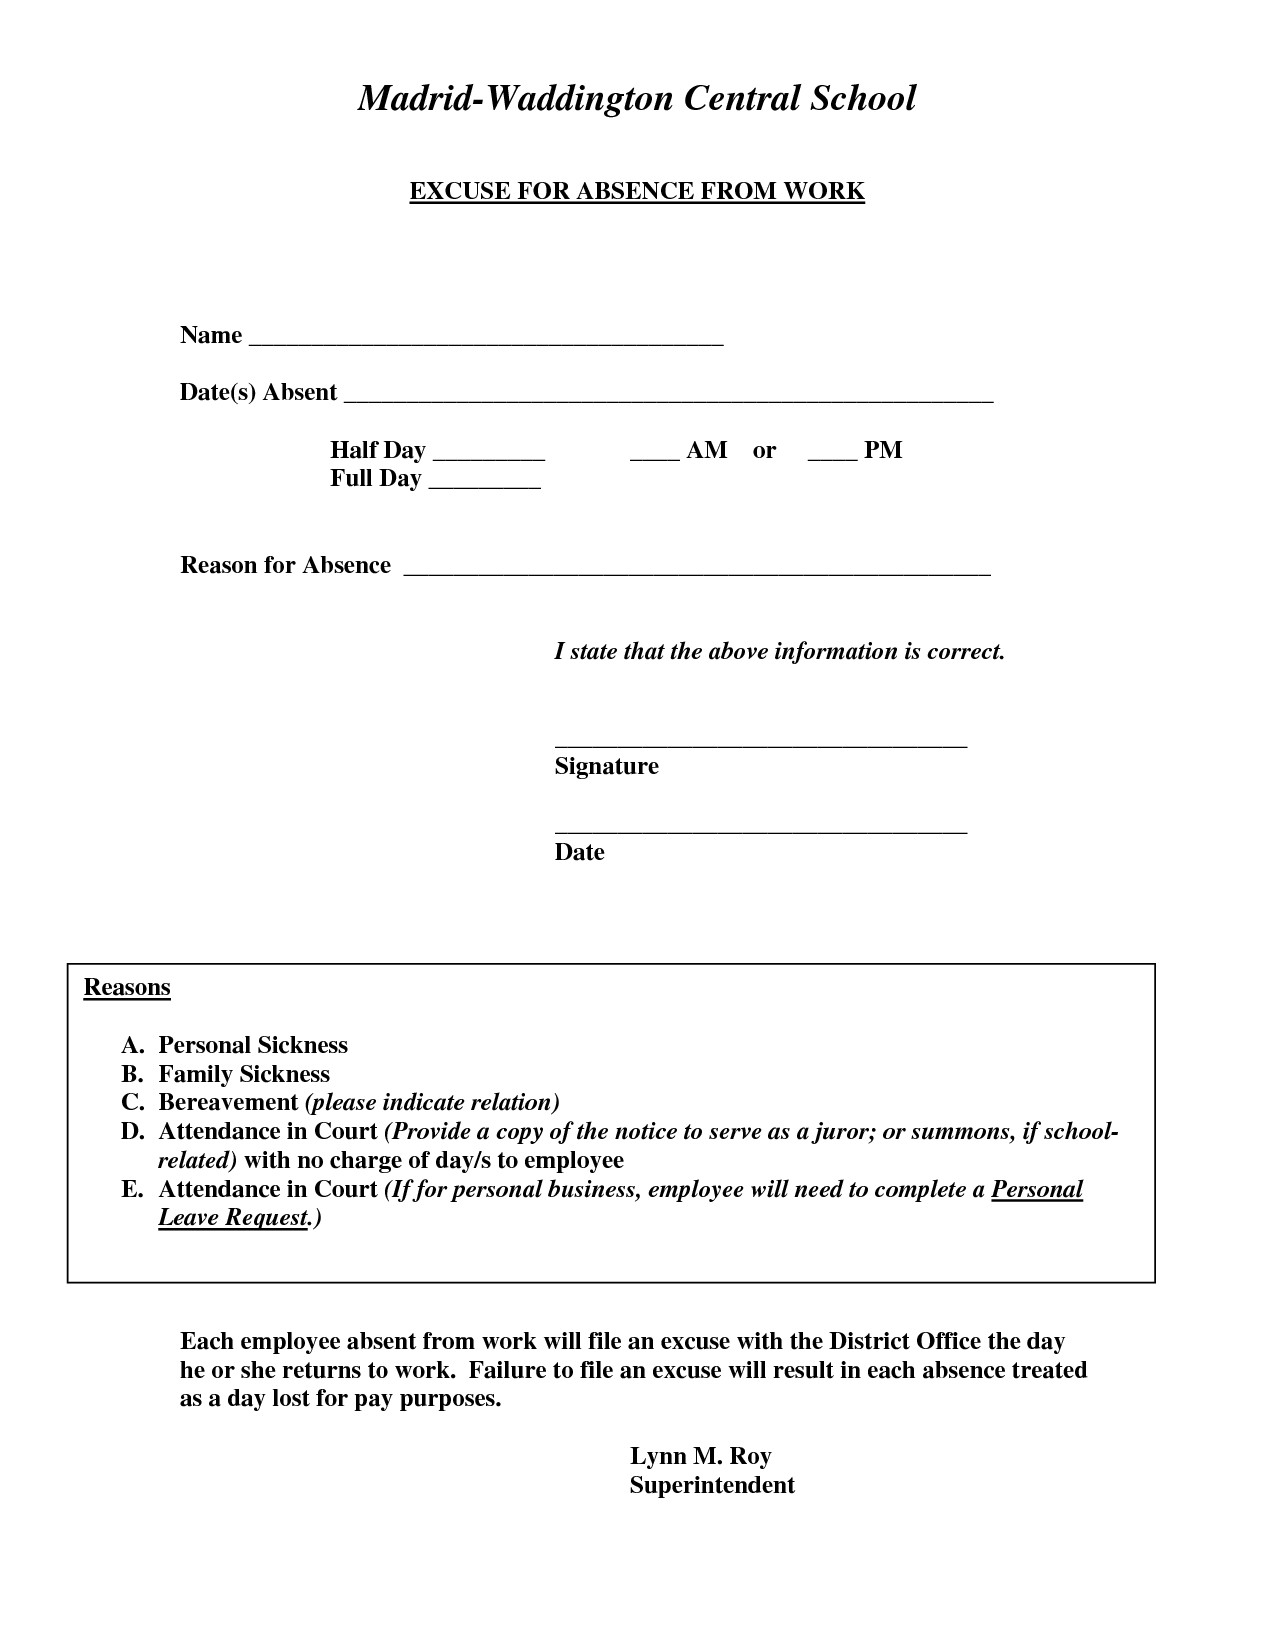 School Excuse Note Template Doctors Excuse for Work Template